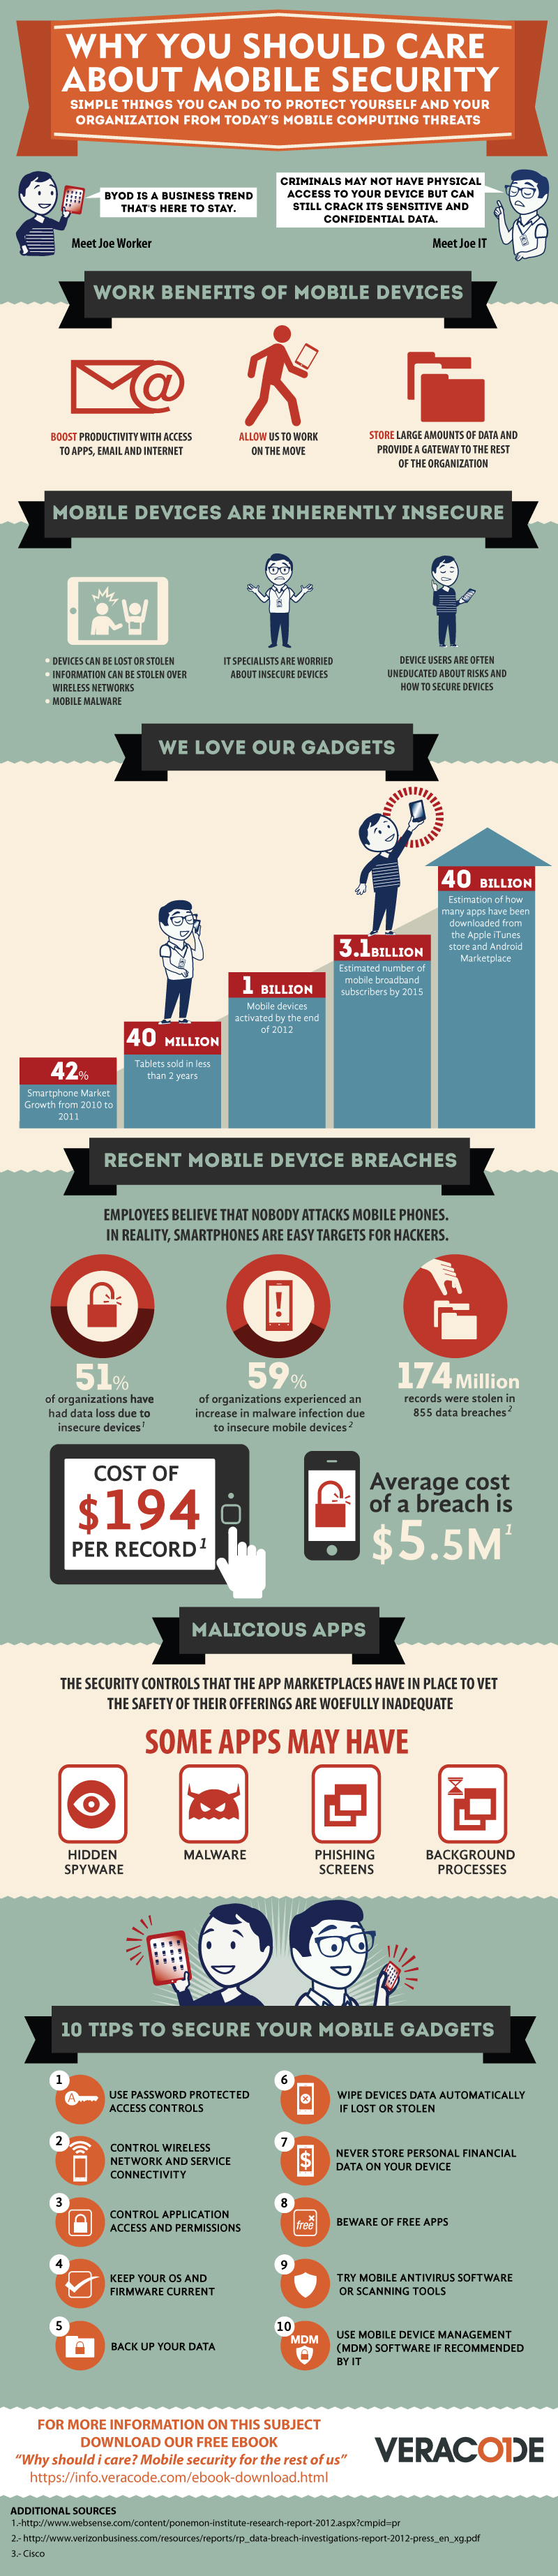 Why You Should Care About Mobile Security